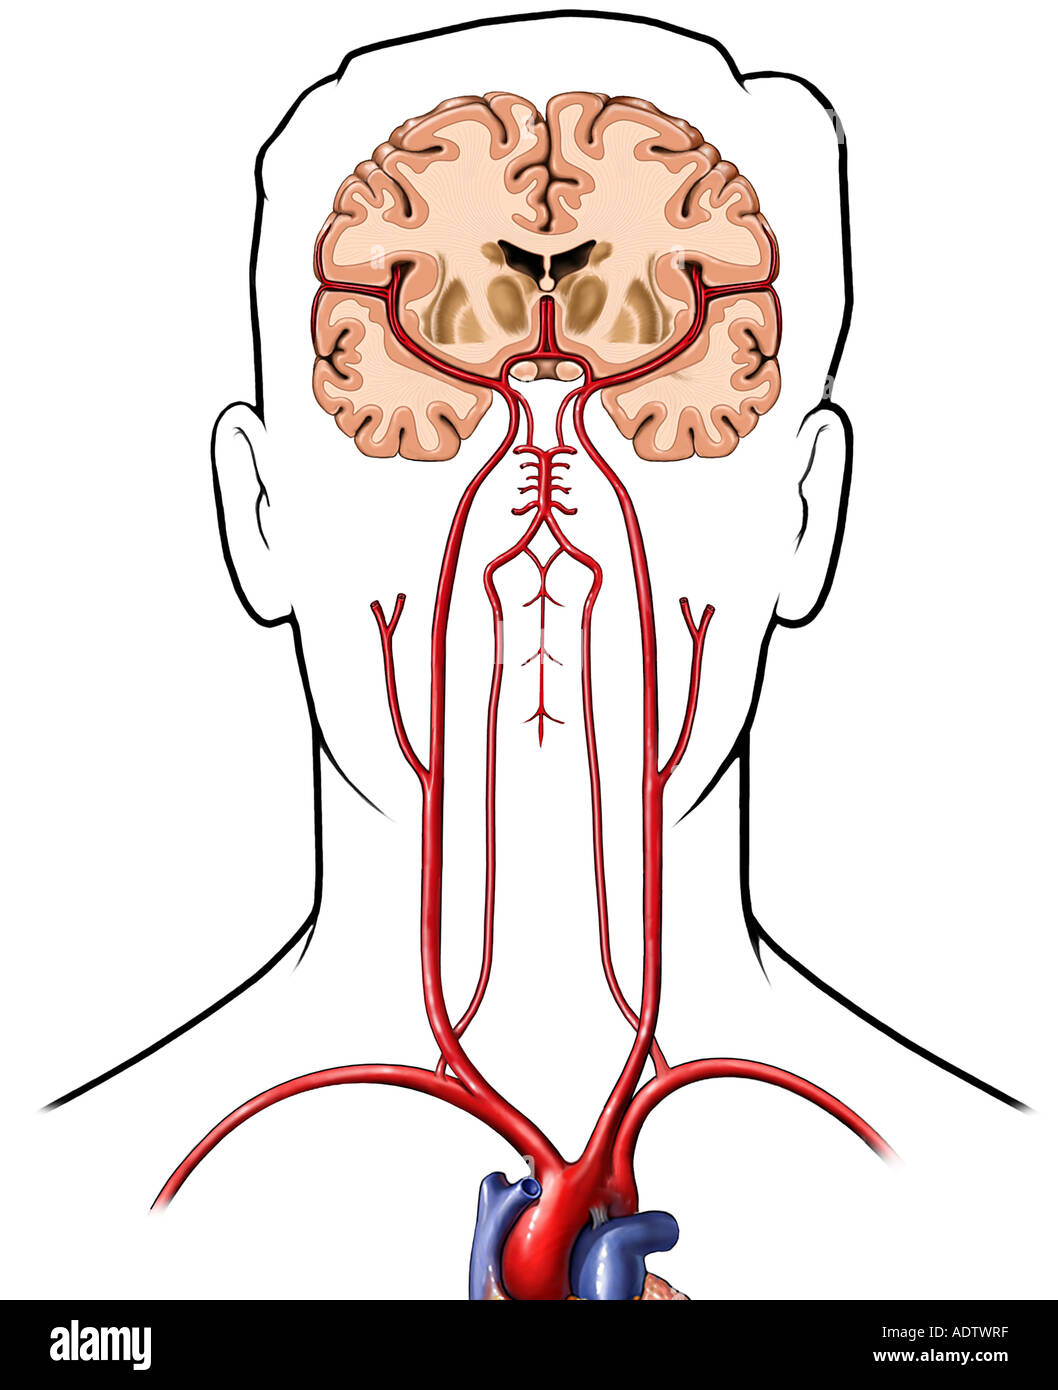 Brain with Arterial Supply, Anterior Cut-away View Stock Photo